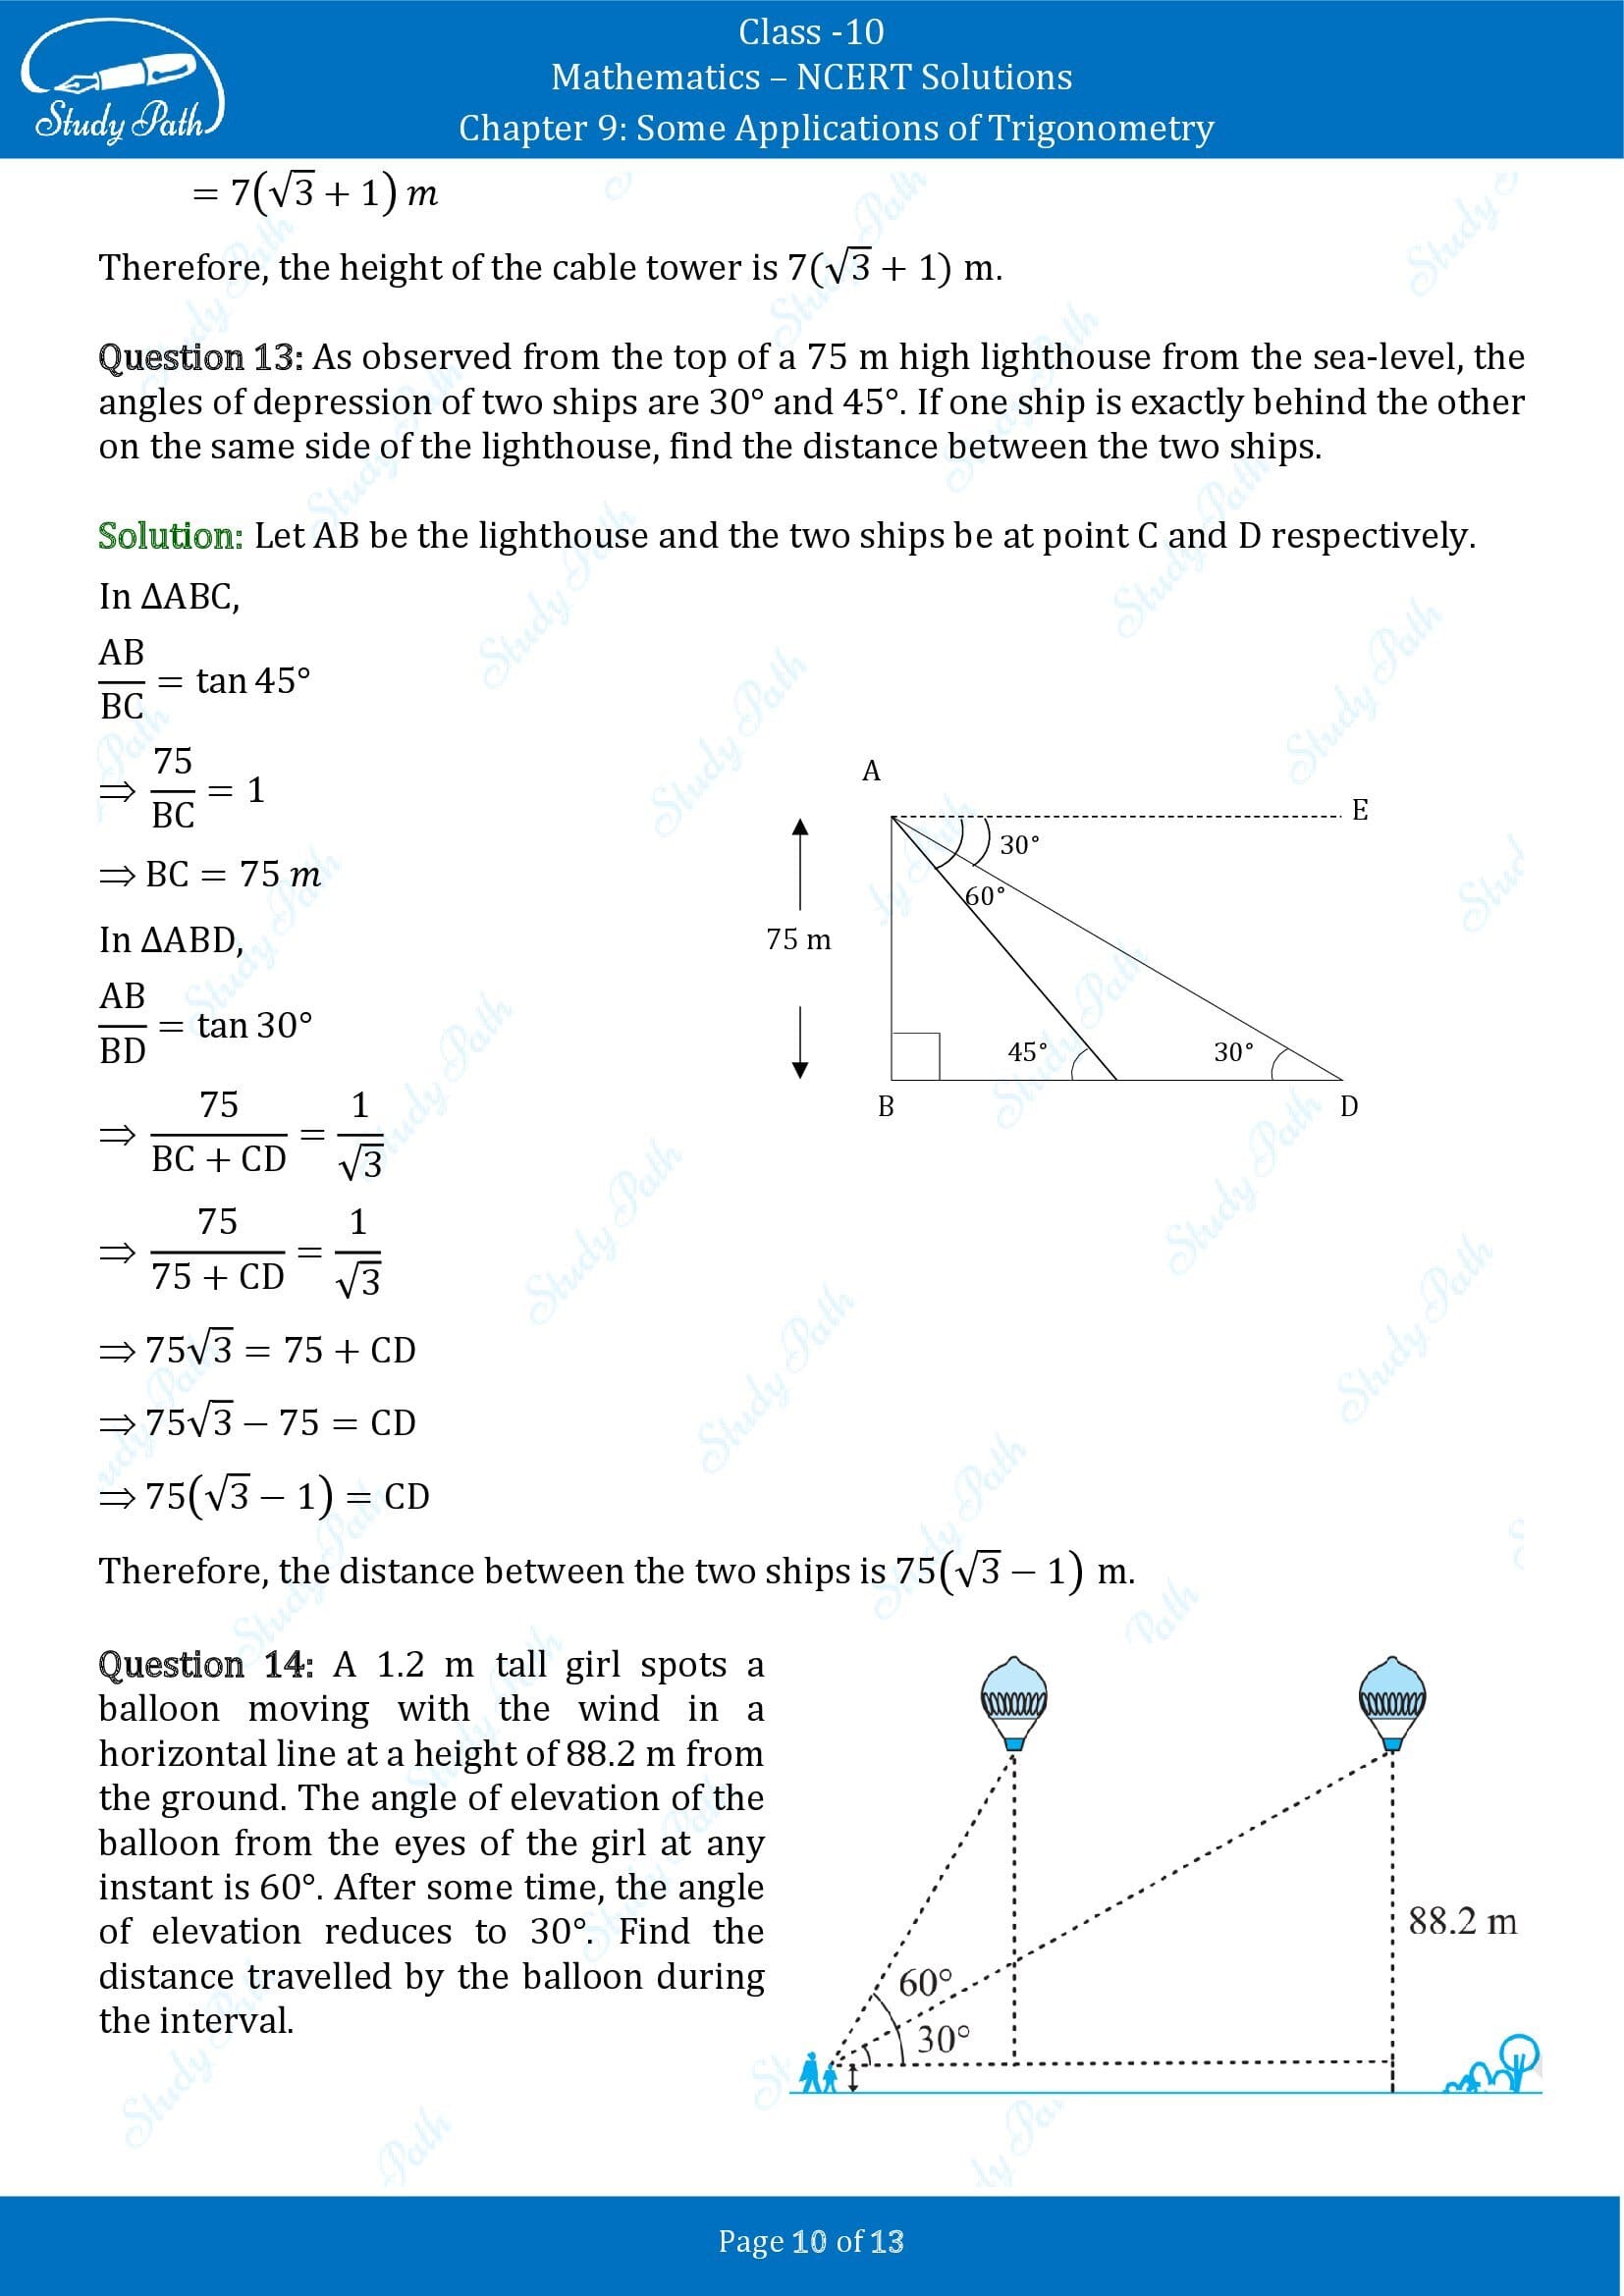 NCERT Solutions for Class 10 Maths Chapter 9 Some Applications of Trigonometry 00010